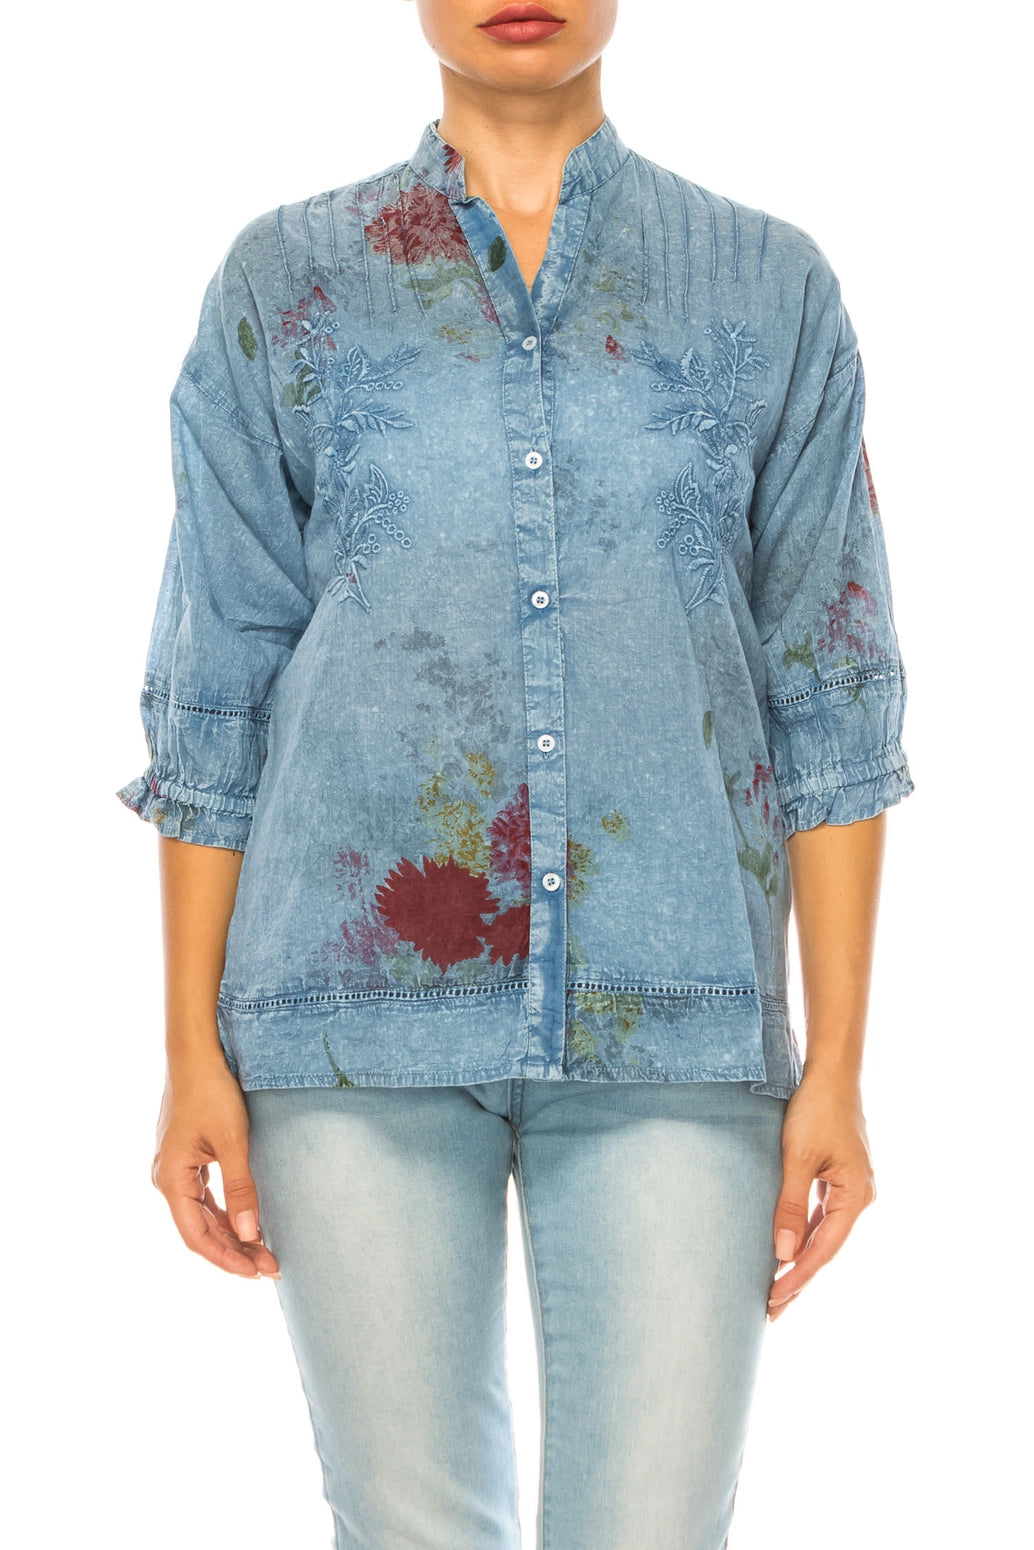 Melissa Vintage Floral Button Down Tunic with Embroidery and Lace